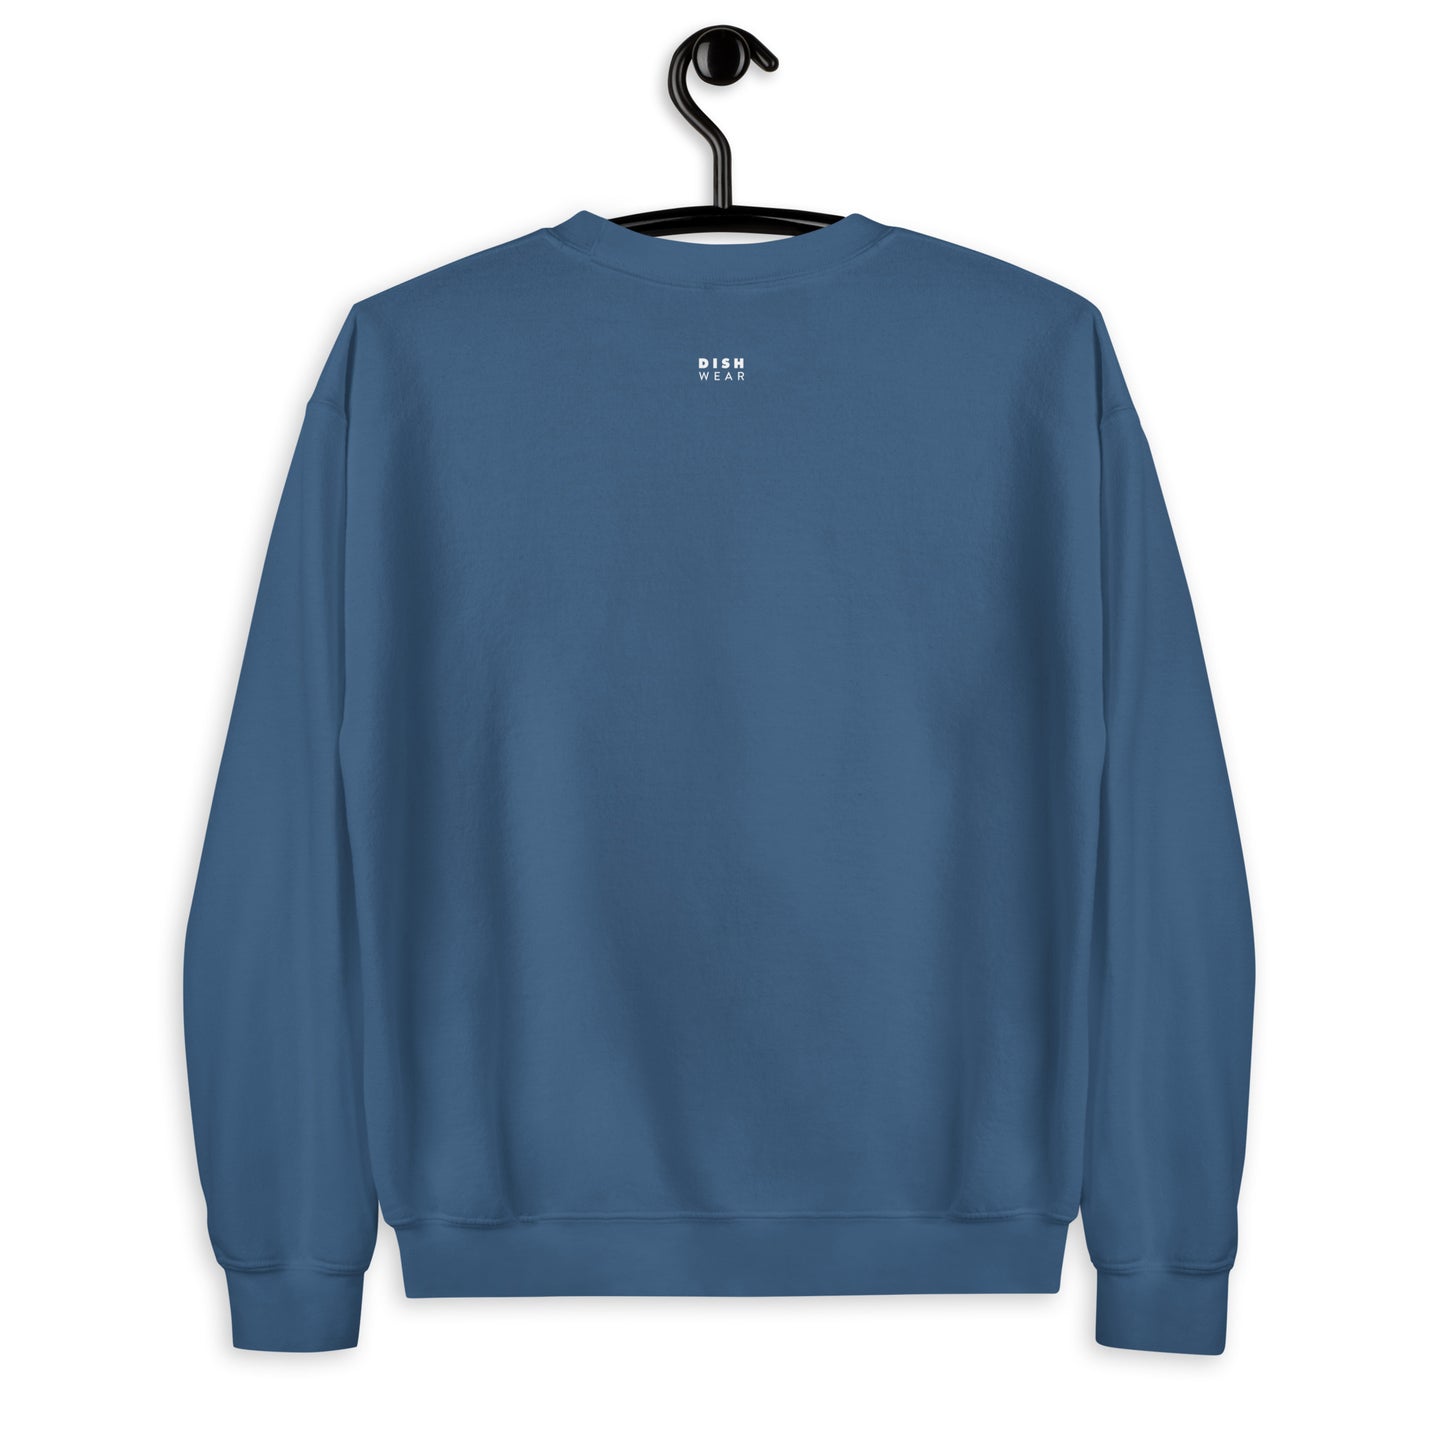 Loaded Fries Sweatshirt - Arched Font